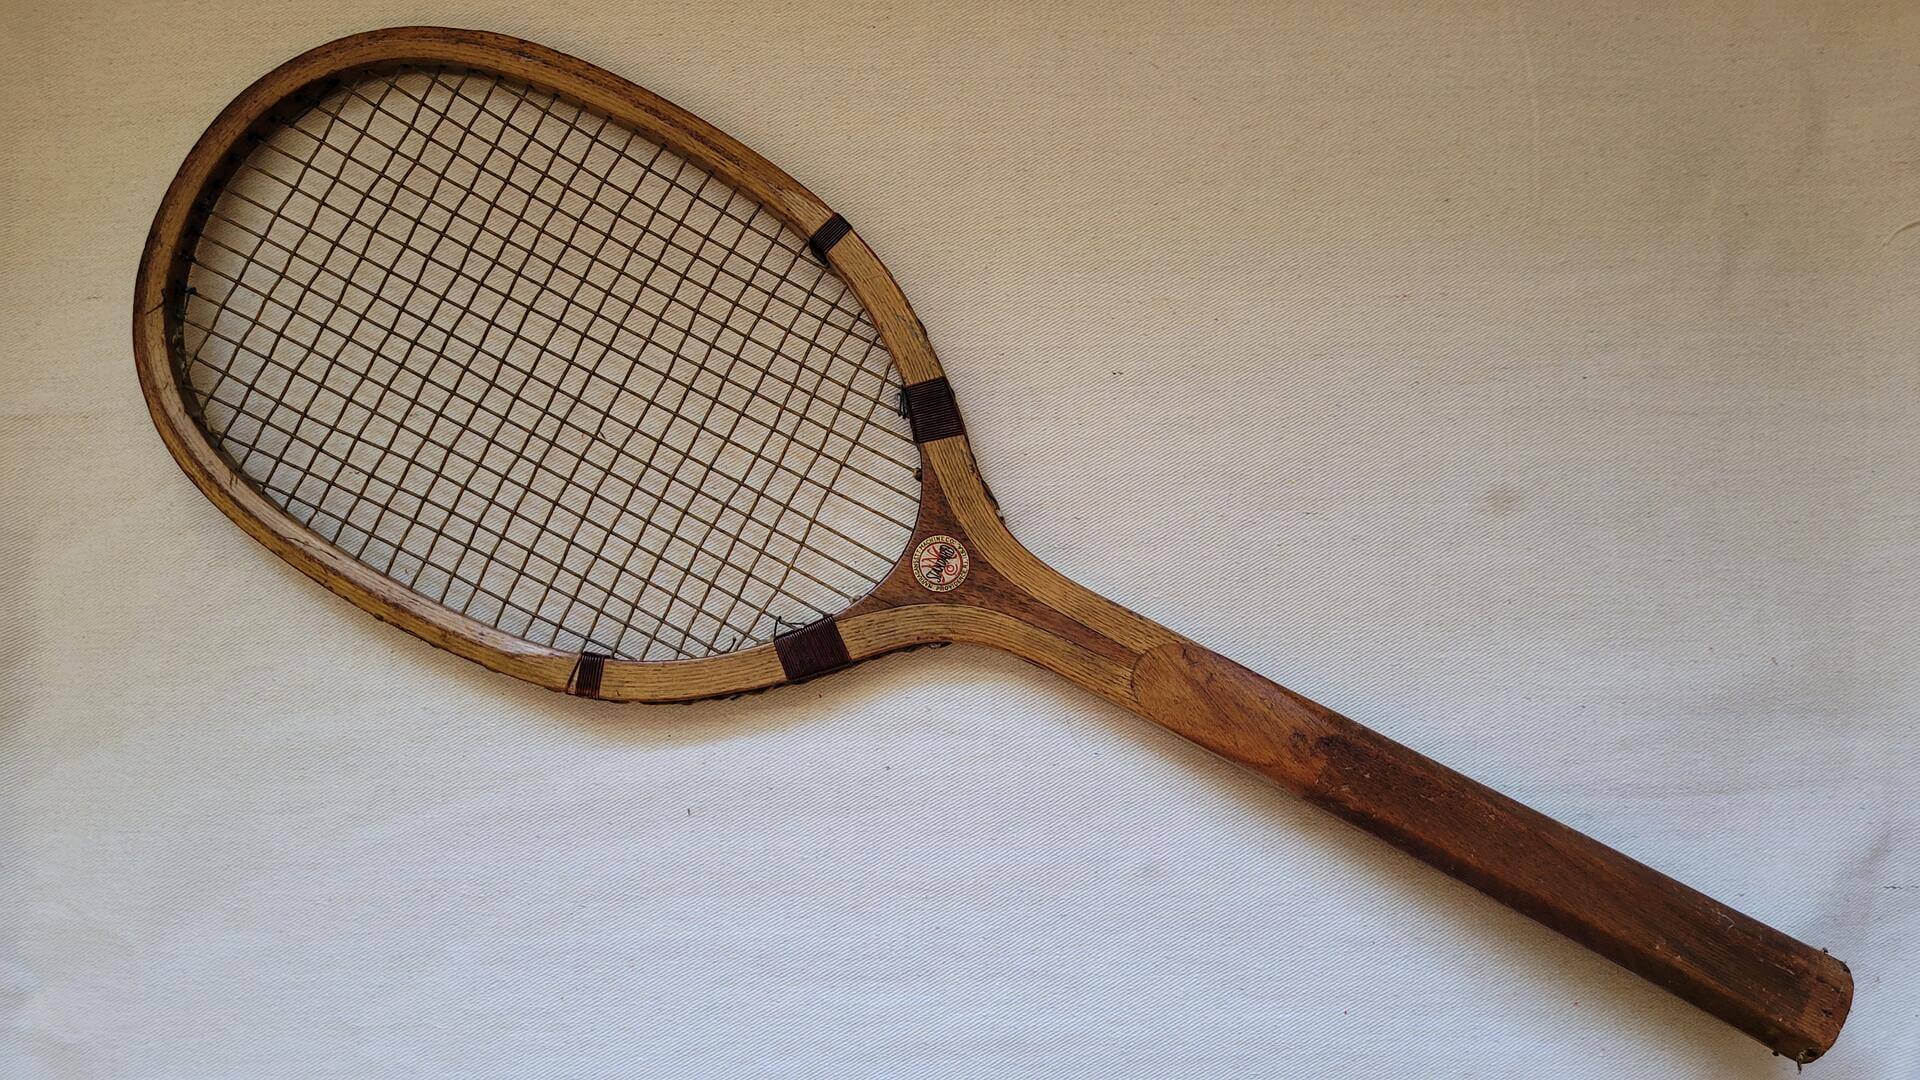 rare-narragansett-machine-company-antique-wooden-tennis-racquet-stanford-model-providence-rhode-island-vintage-made-in-usa-19th-century-sports-collectibles